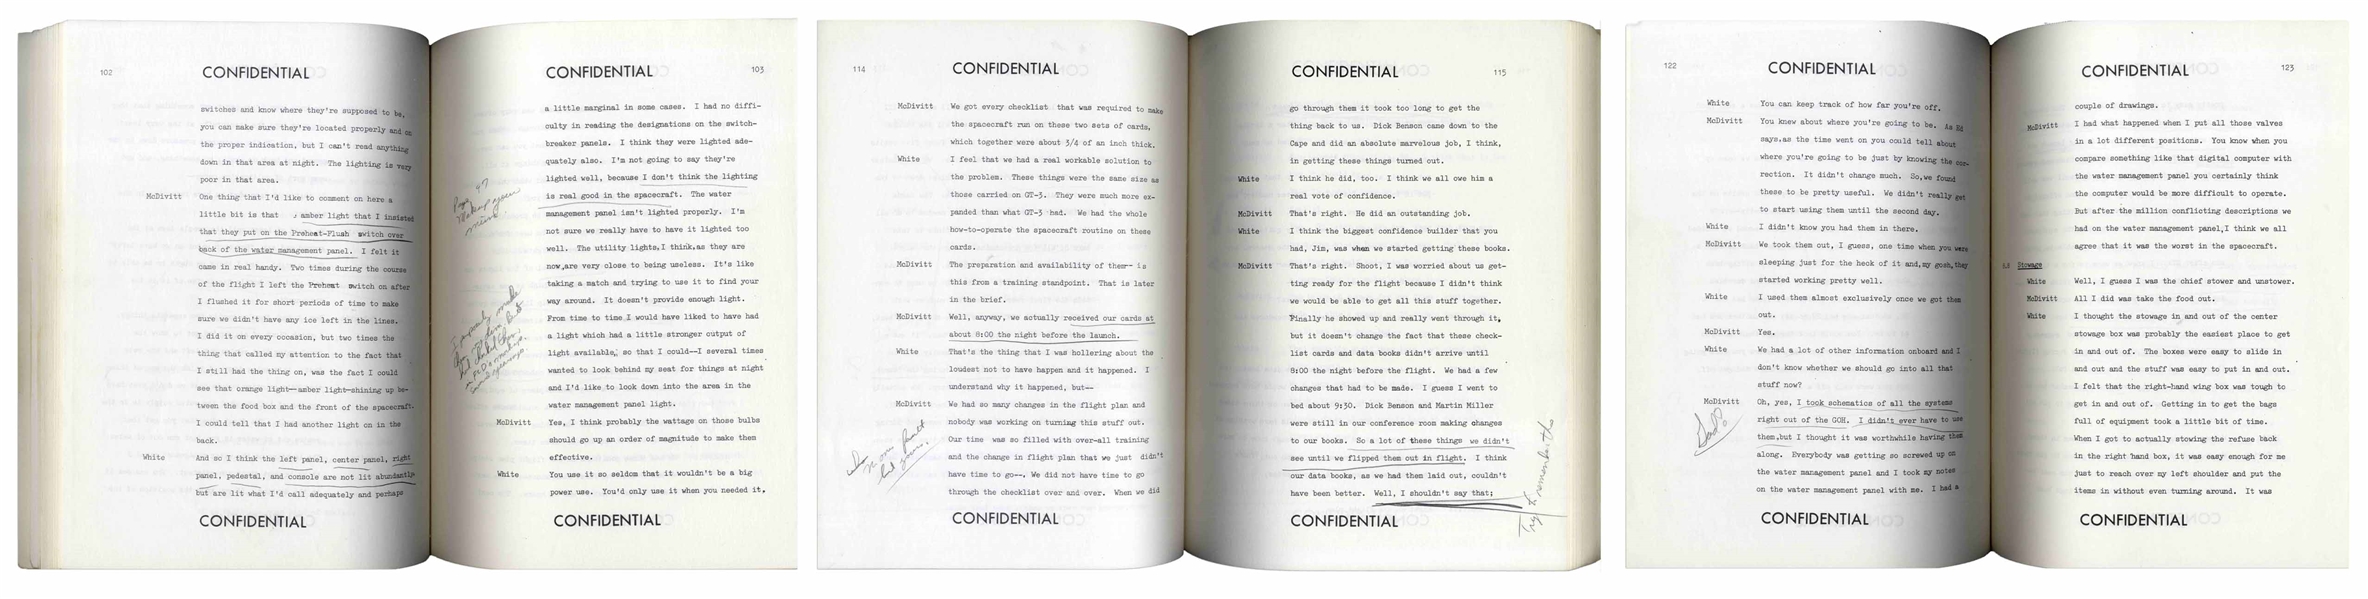 Gus Grissom Personally Owned Debriefing Report for Gemini 4, Heavily Hand-Edited by Grissom: ''Kick his ass!!'' and ''Did they have a moon on dark side?''